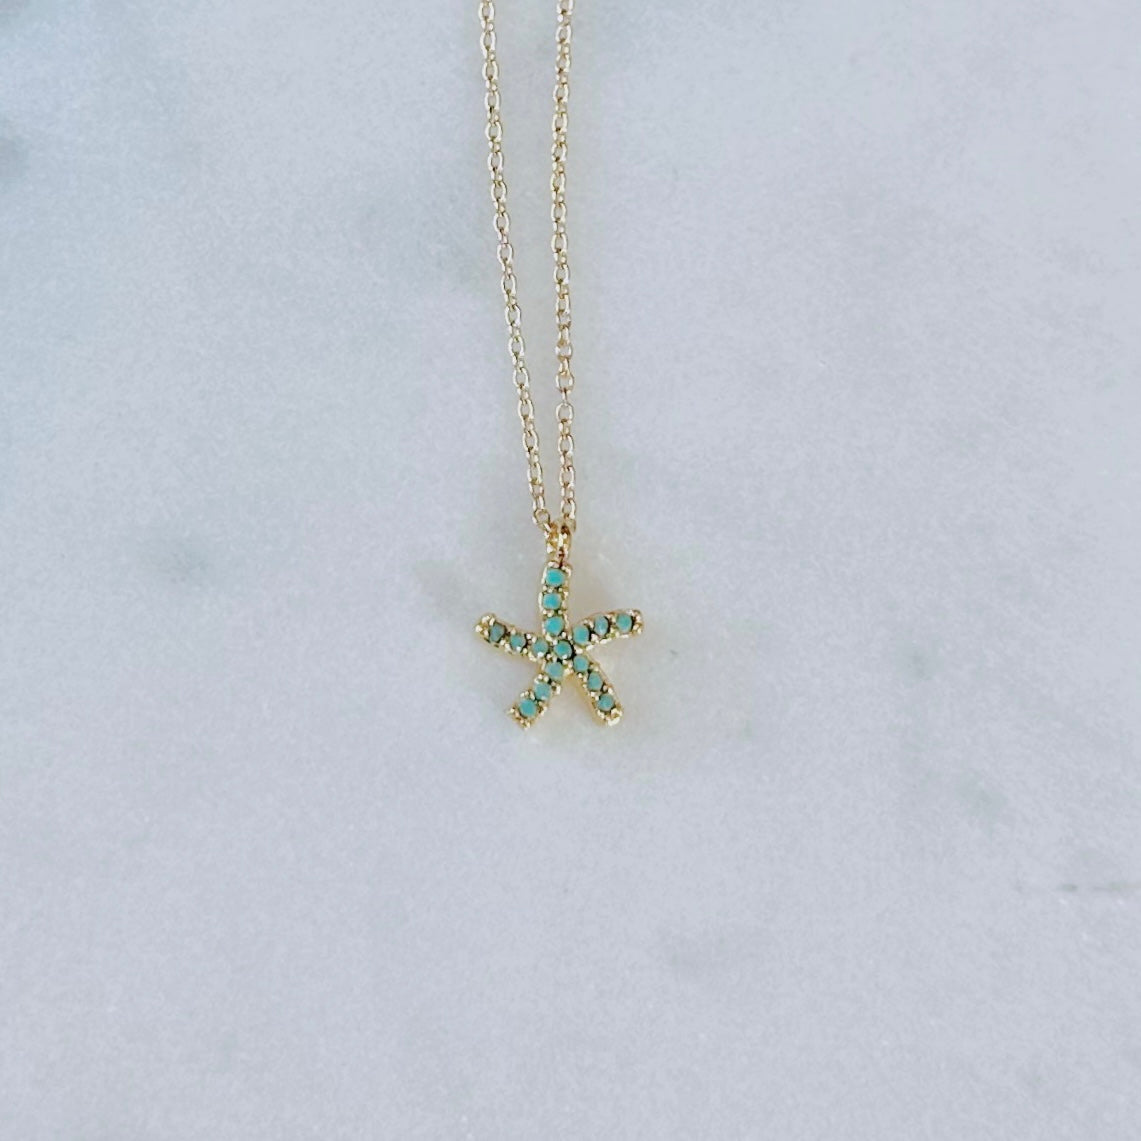 Dainty turquoise gem paved gold starfish necklace